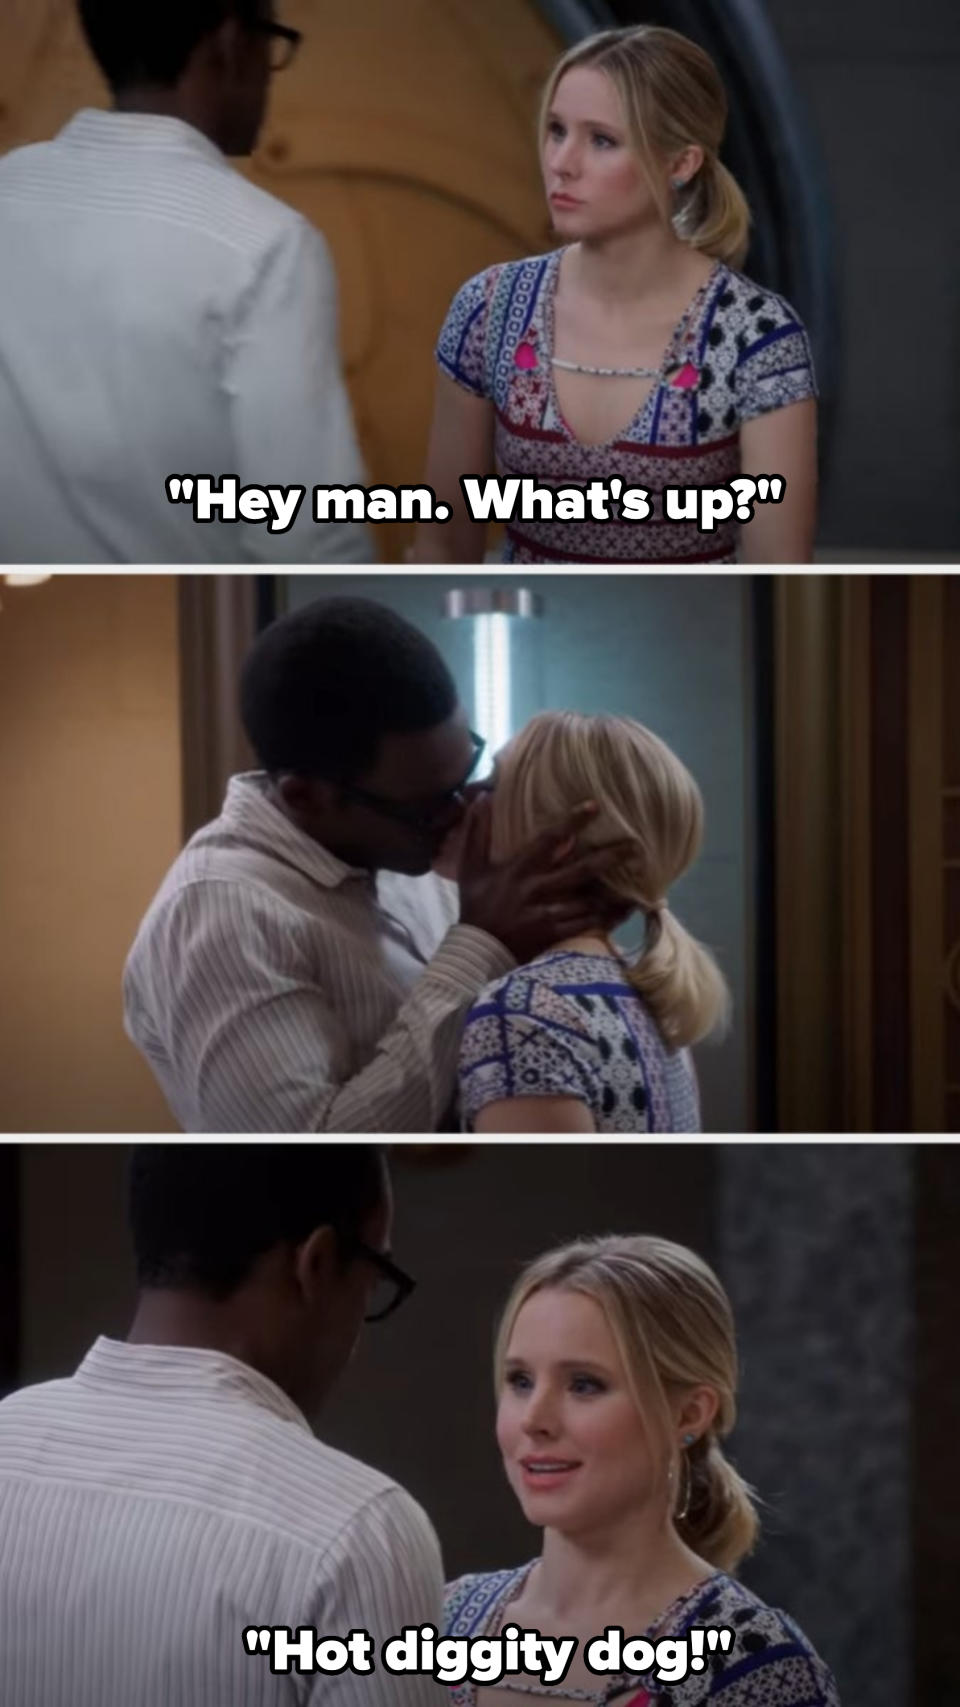 Eleanor saying "Hey, man! What's up?" to Chidi, and then they kiss and she says "Hot diggity dog!"